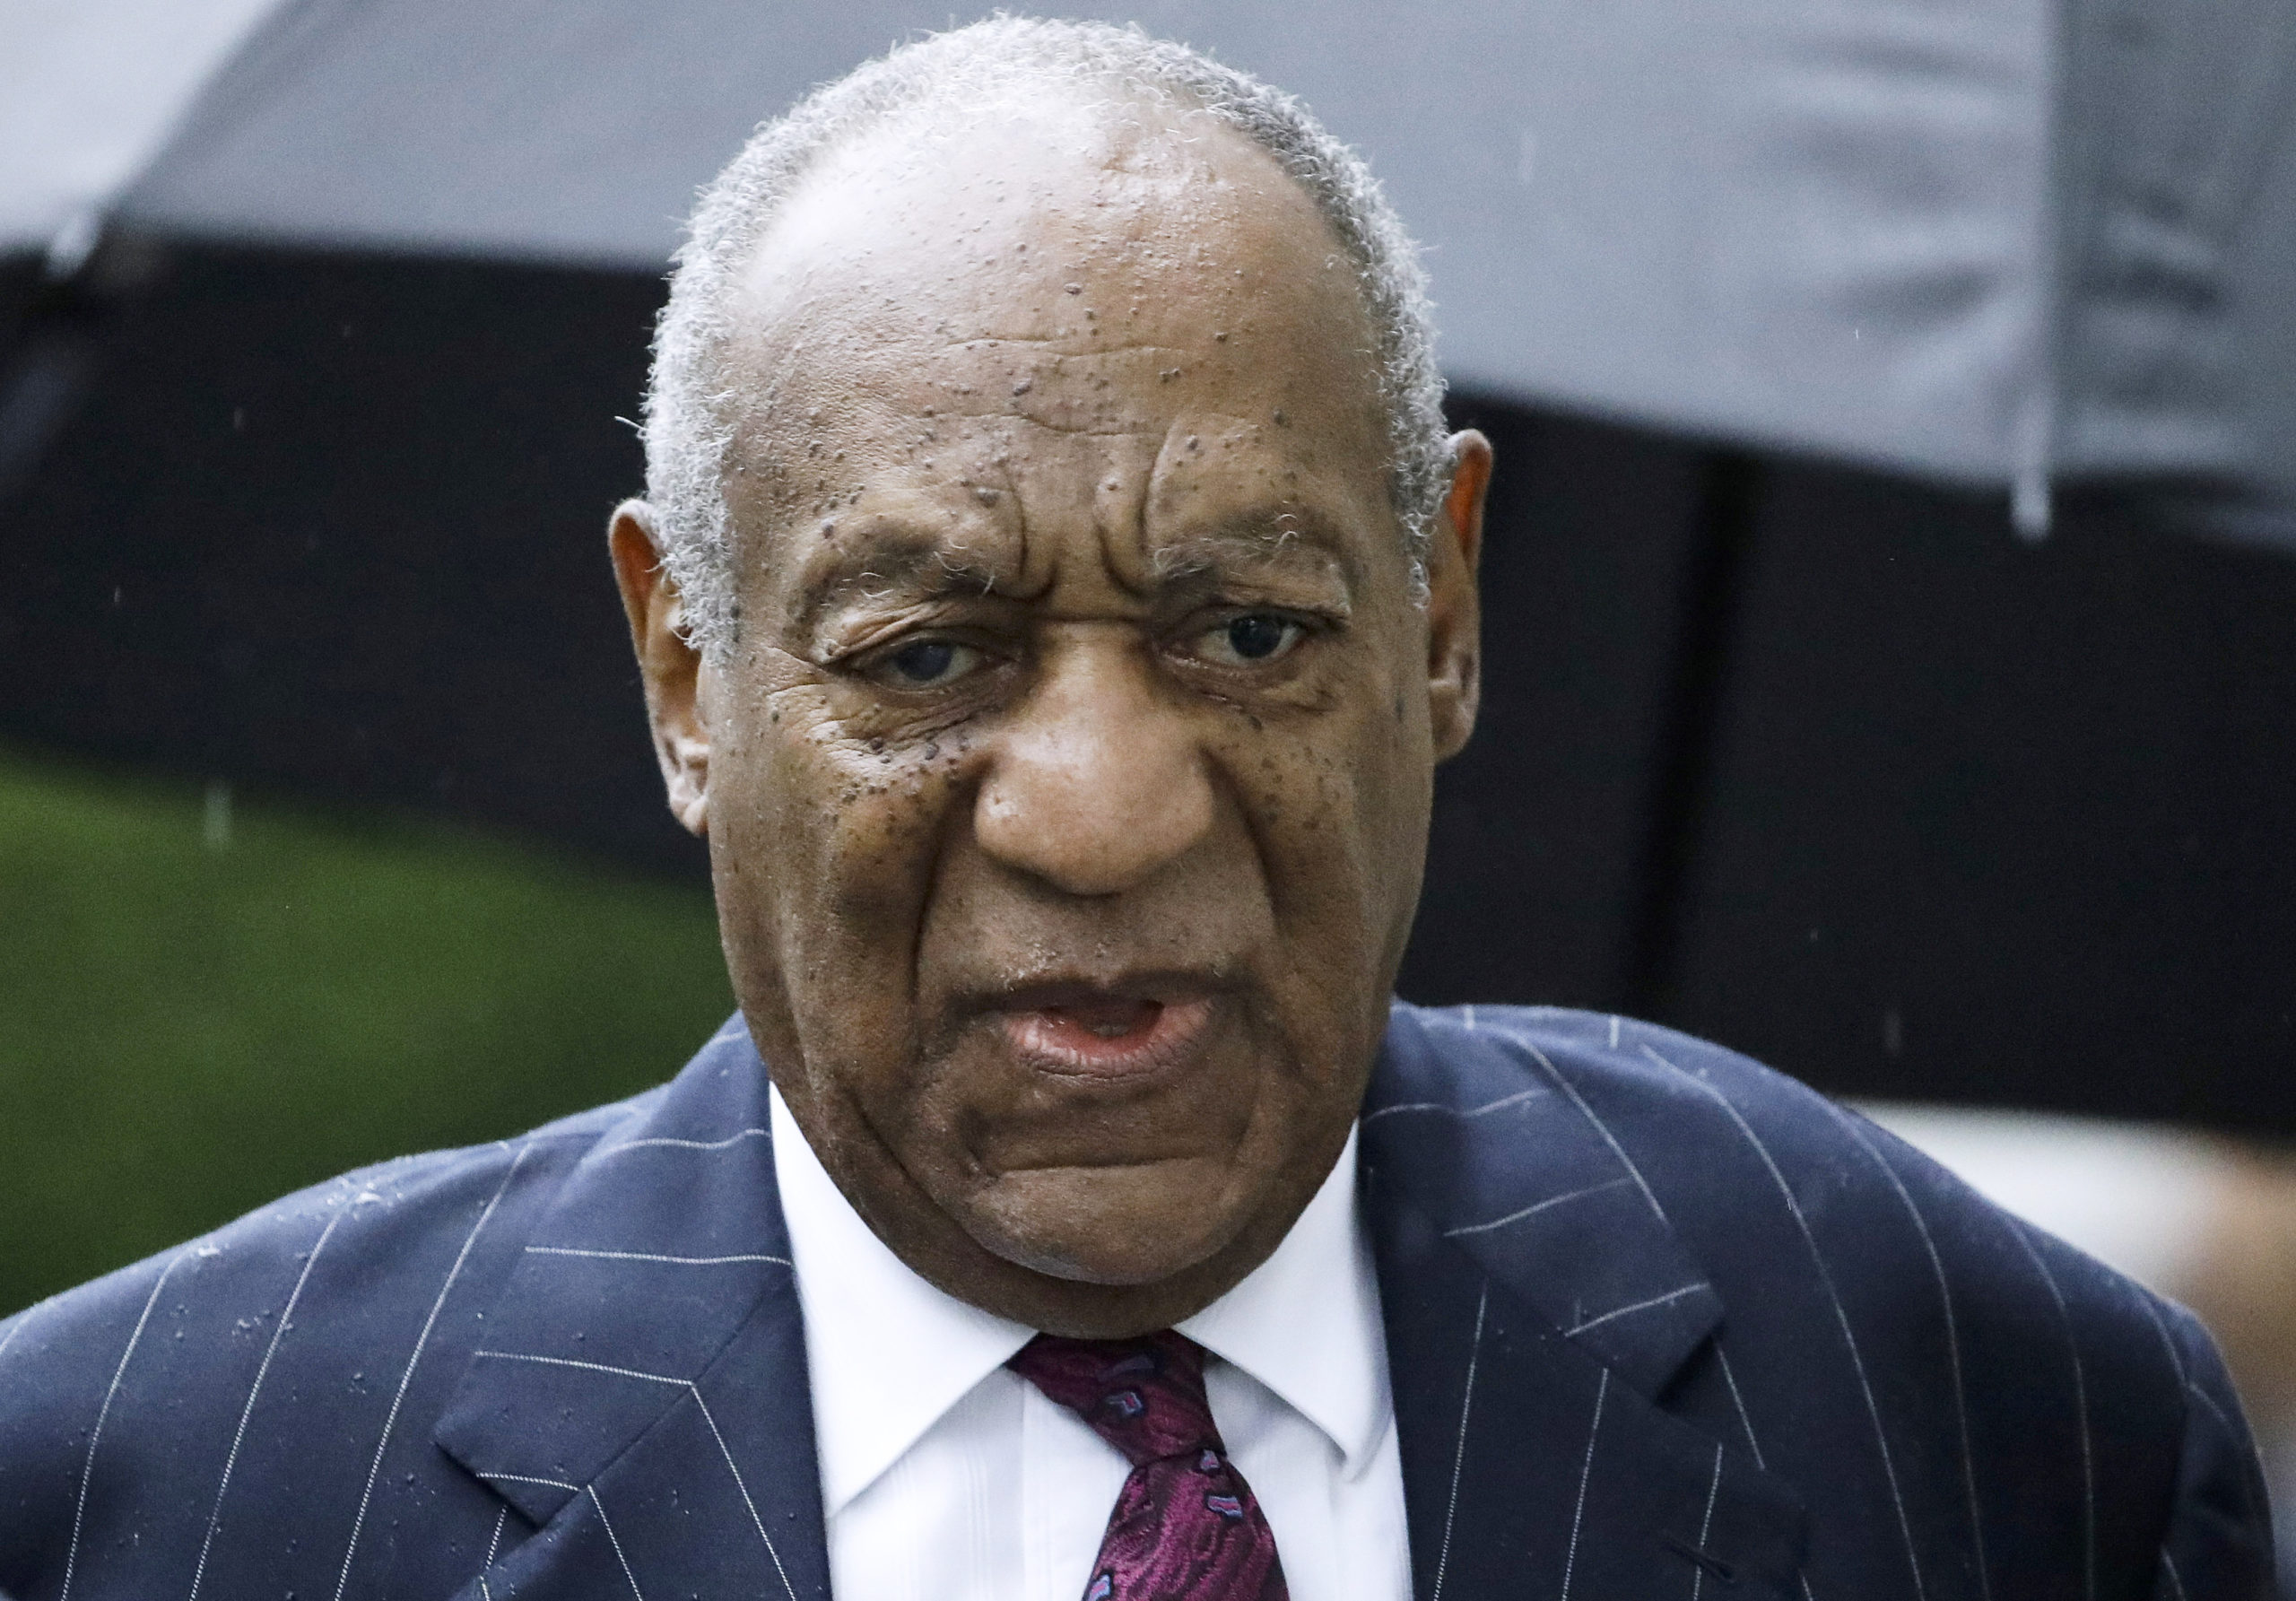 Bill Cosby was convicted of sexual assault in 1975 at the Playboy Mansion.